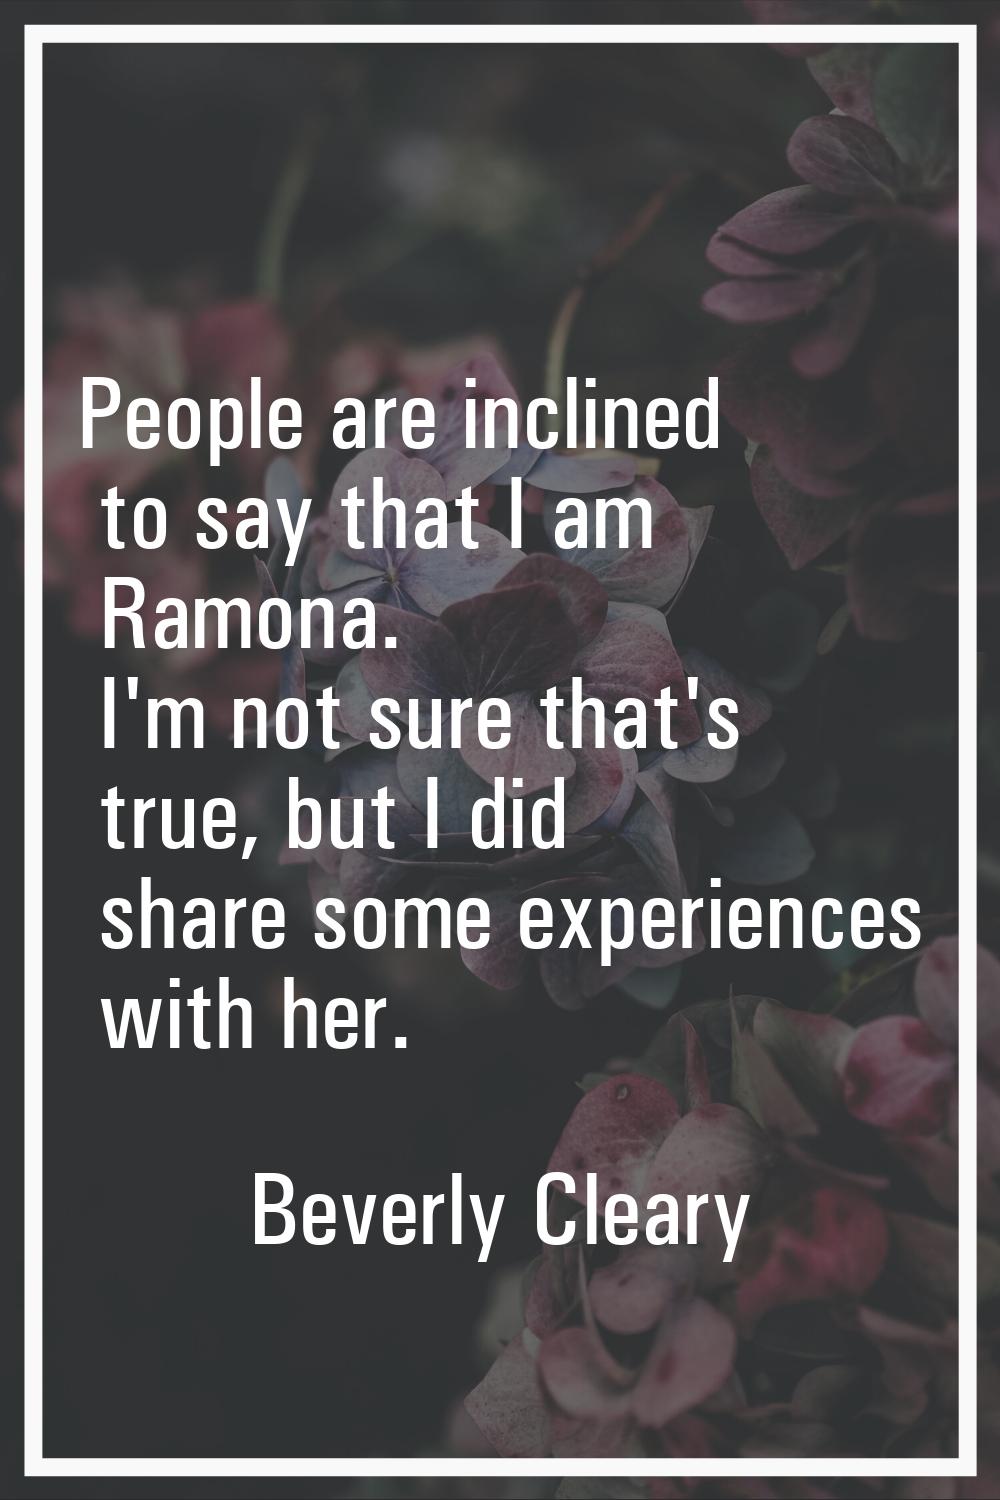 People are inclined to say that I am Ramona. I'm not sure that's true, but I did share some experie